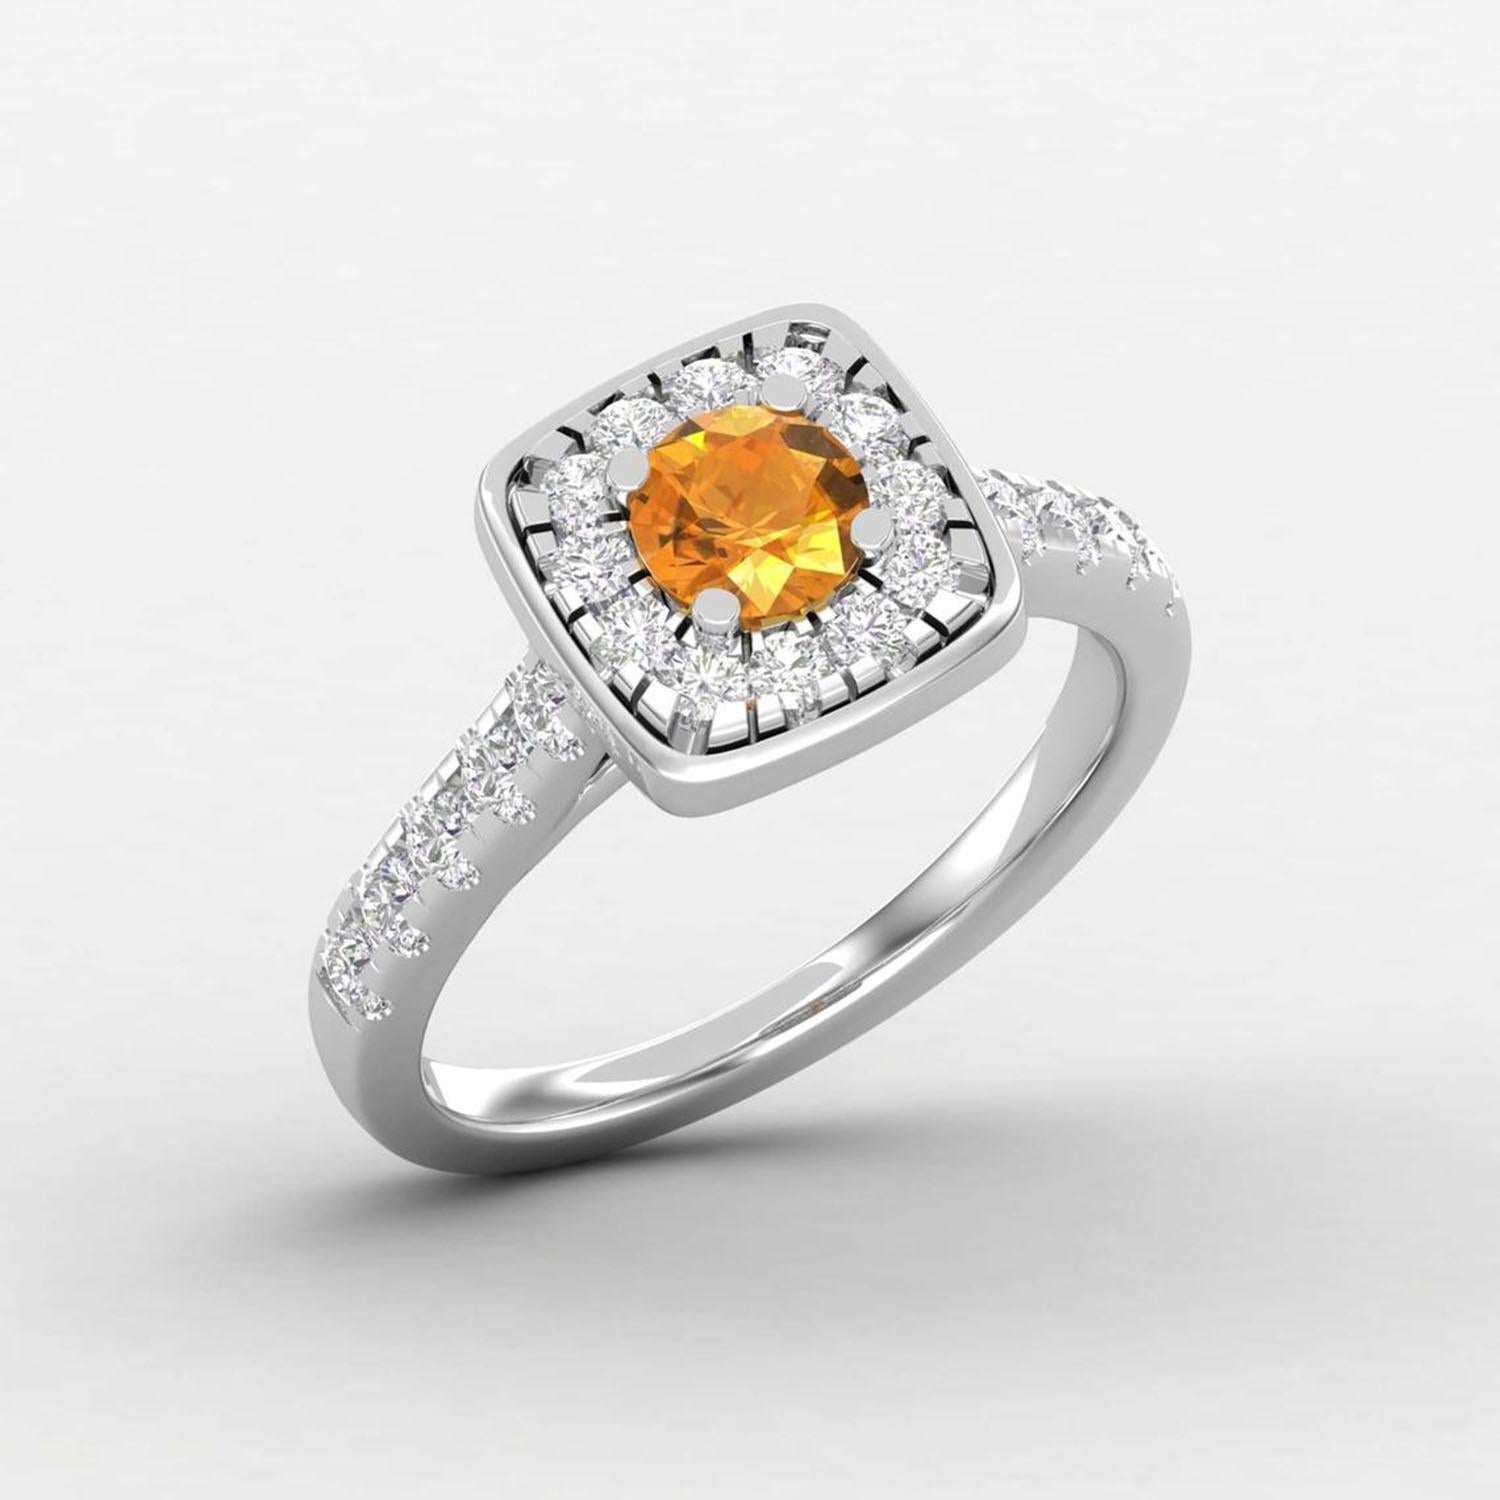 Round Cut 14 Karat Gold Citrine Ring / Diamond Solitaire Ring / Ring for Her For Sale